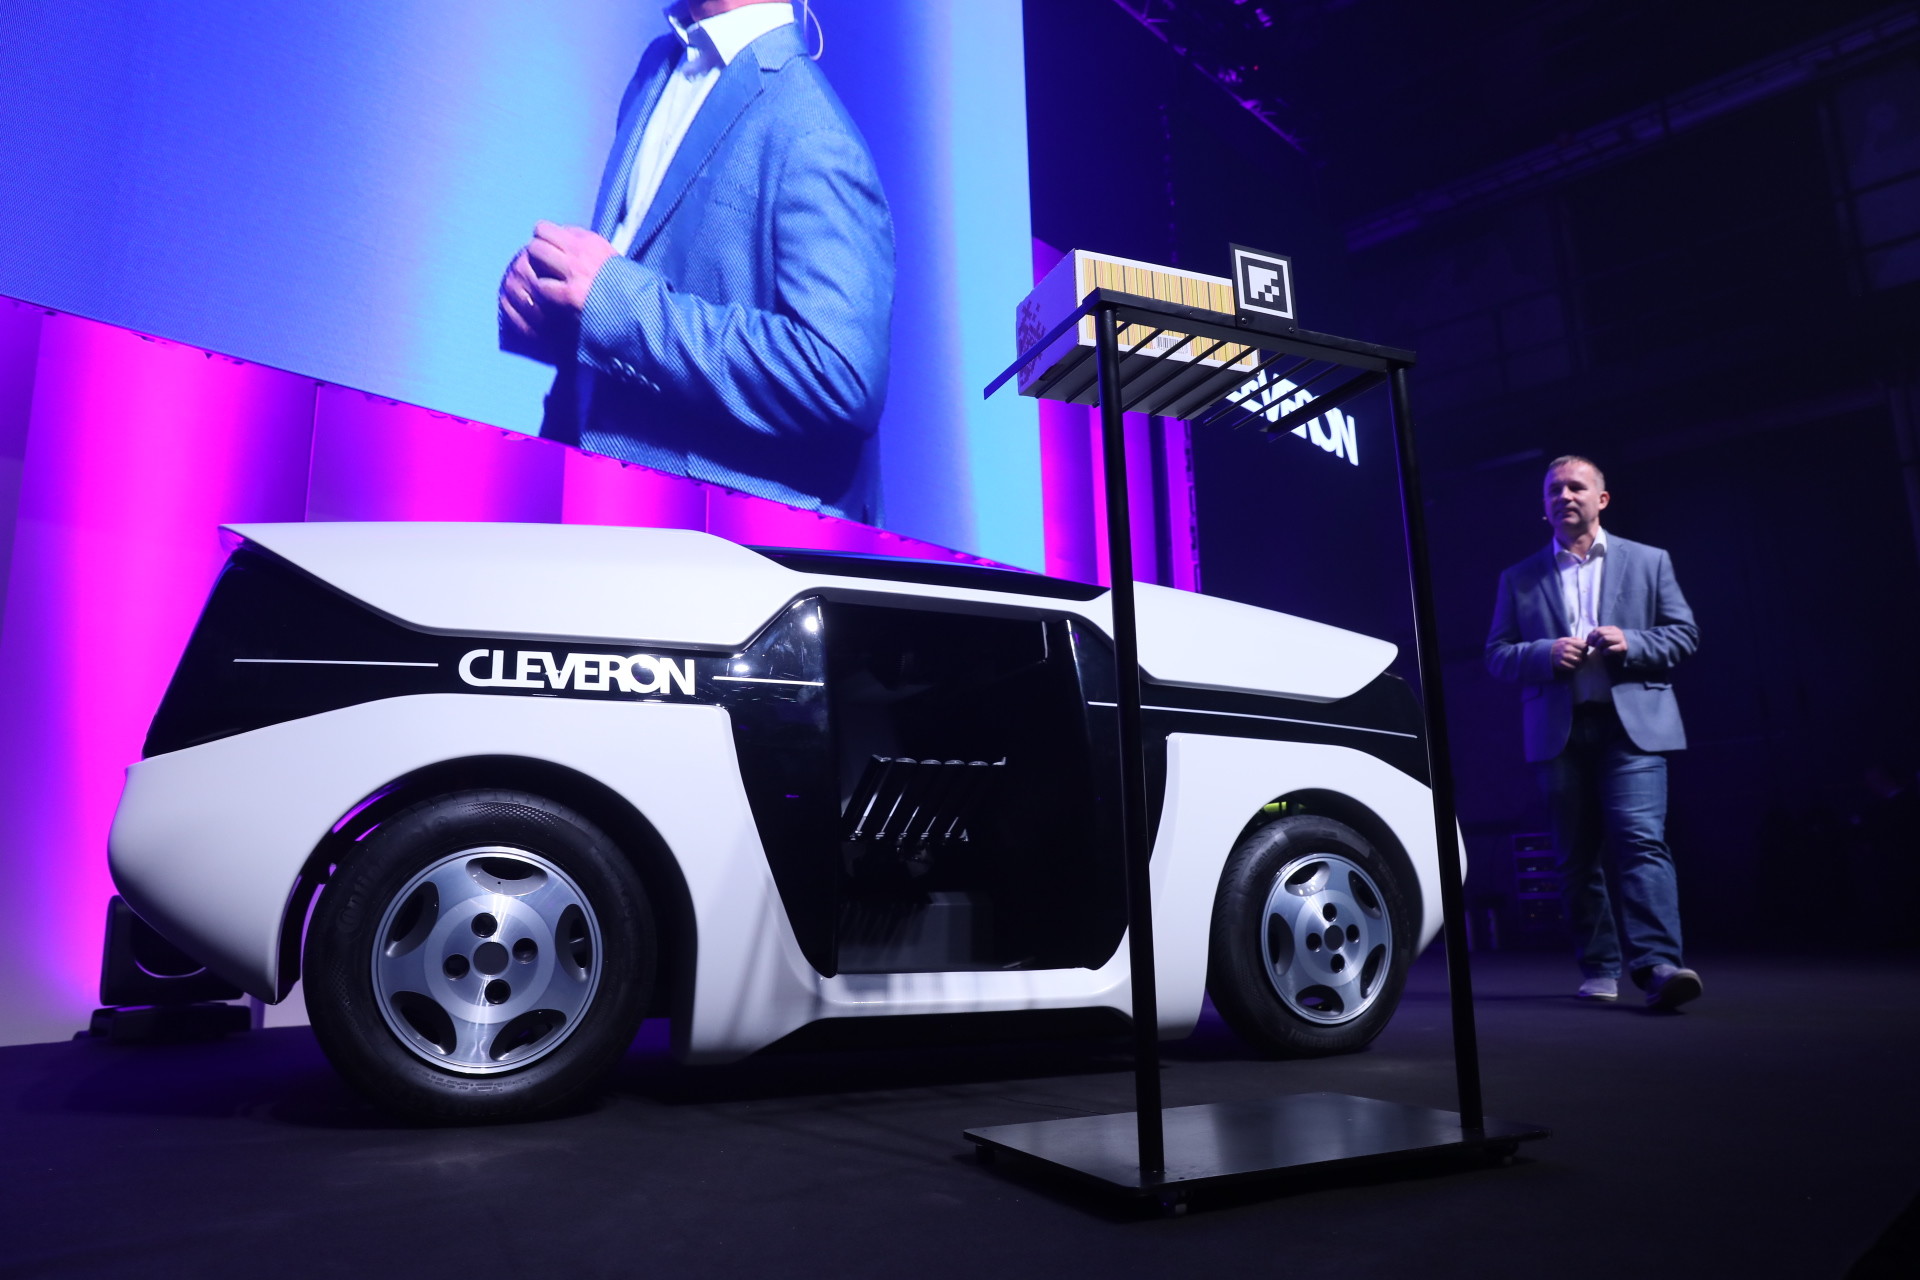 Cleveron's new autonomous robot delivery system. Image courtesy the company.